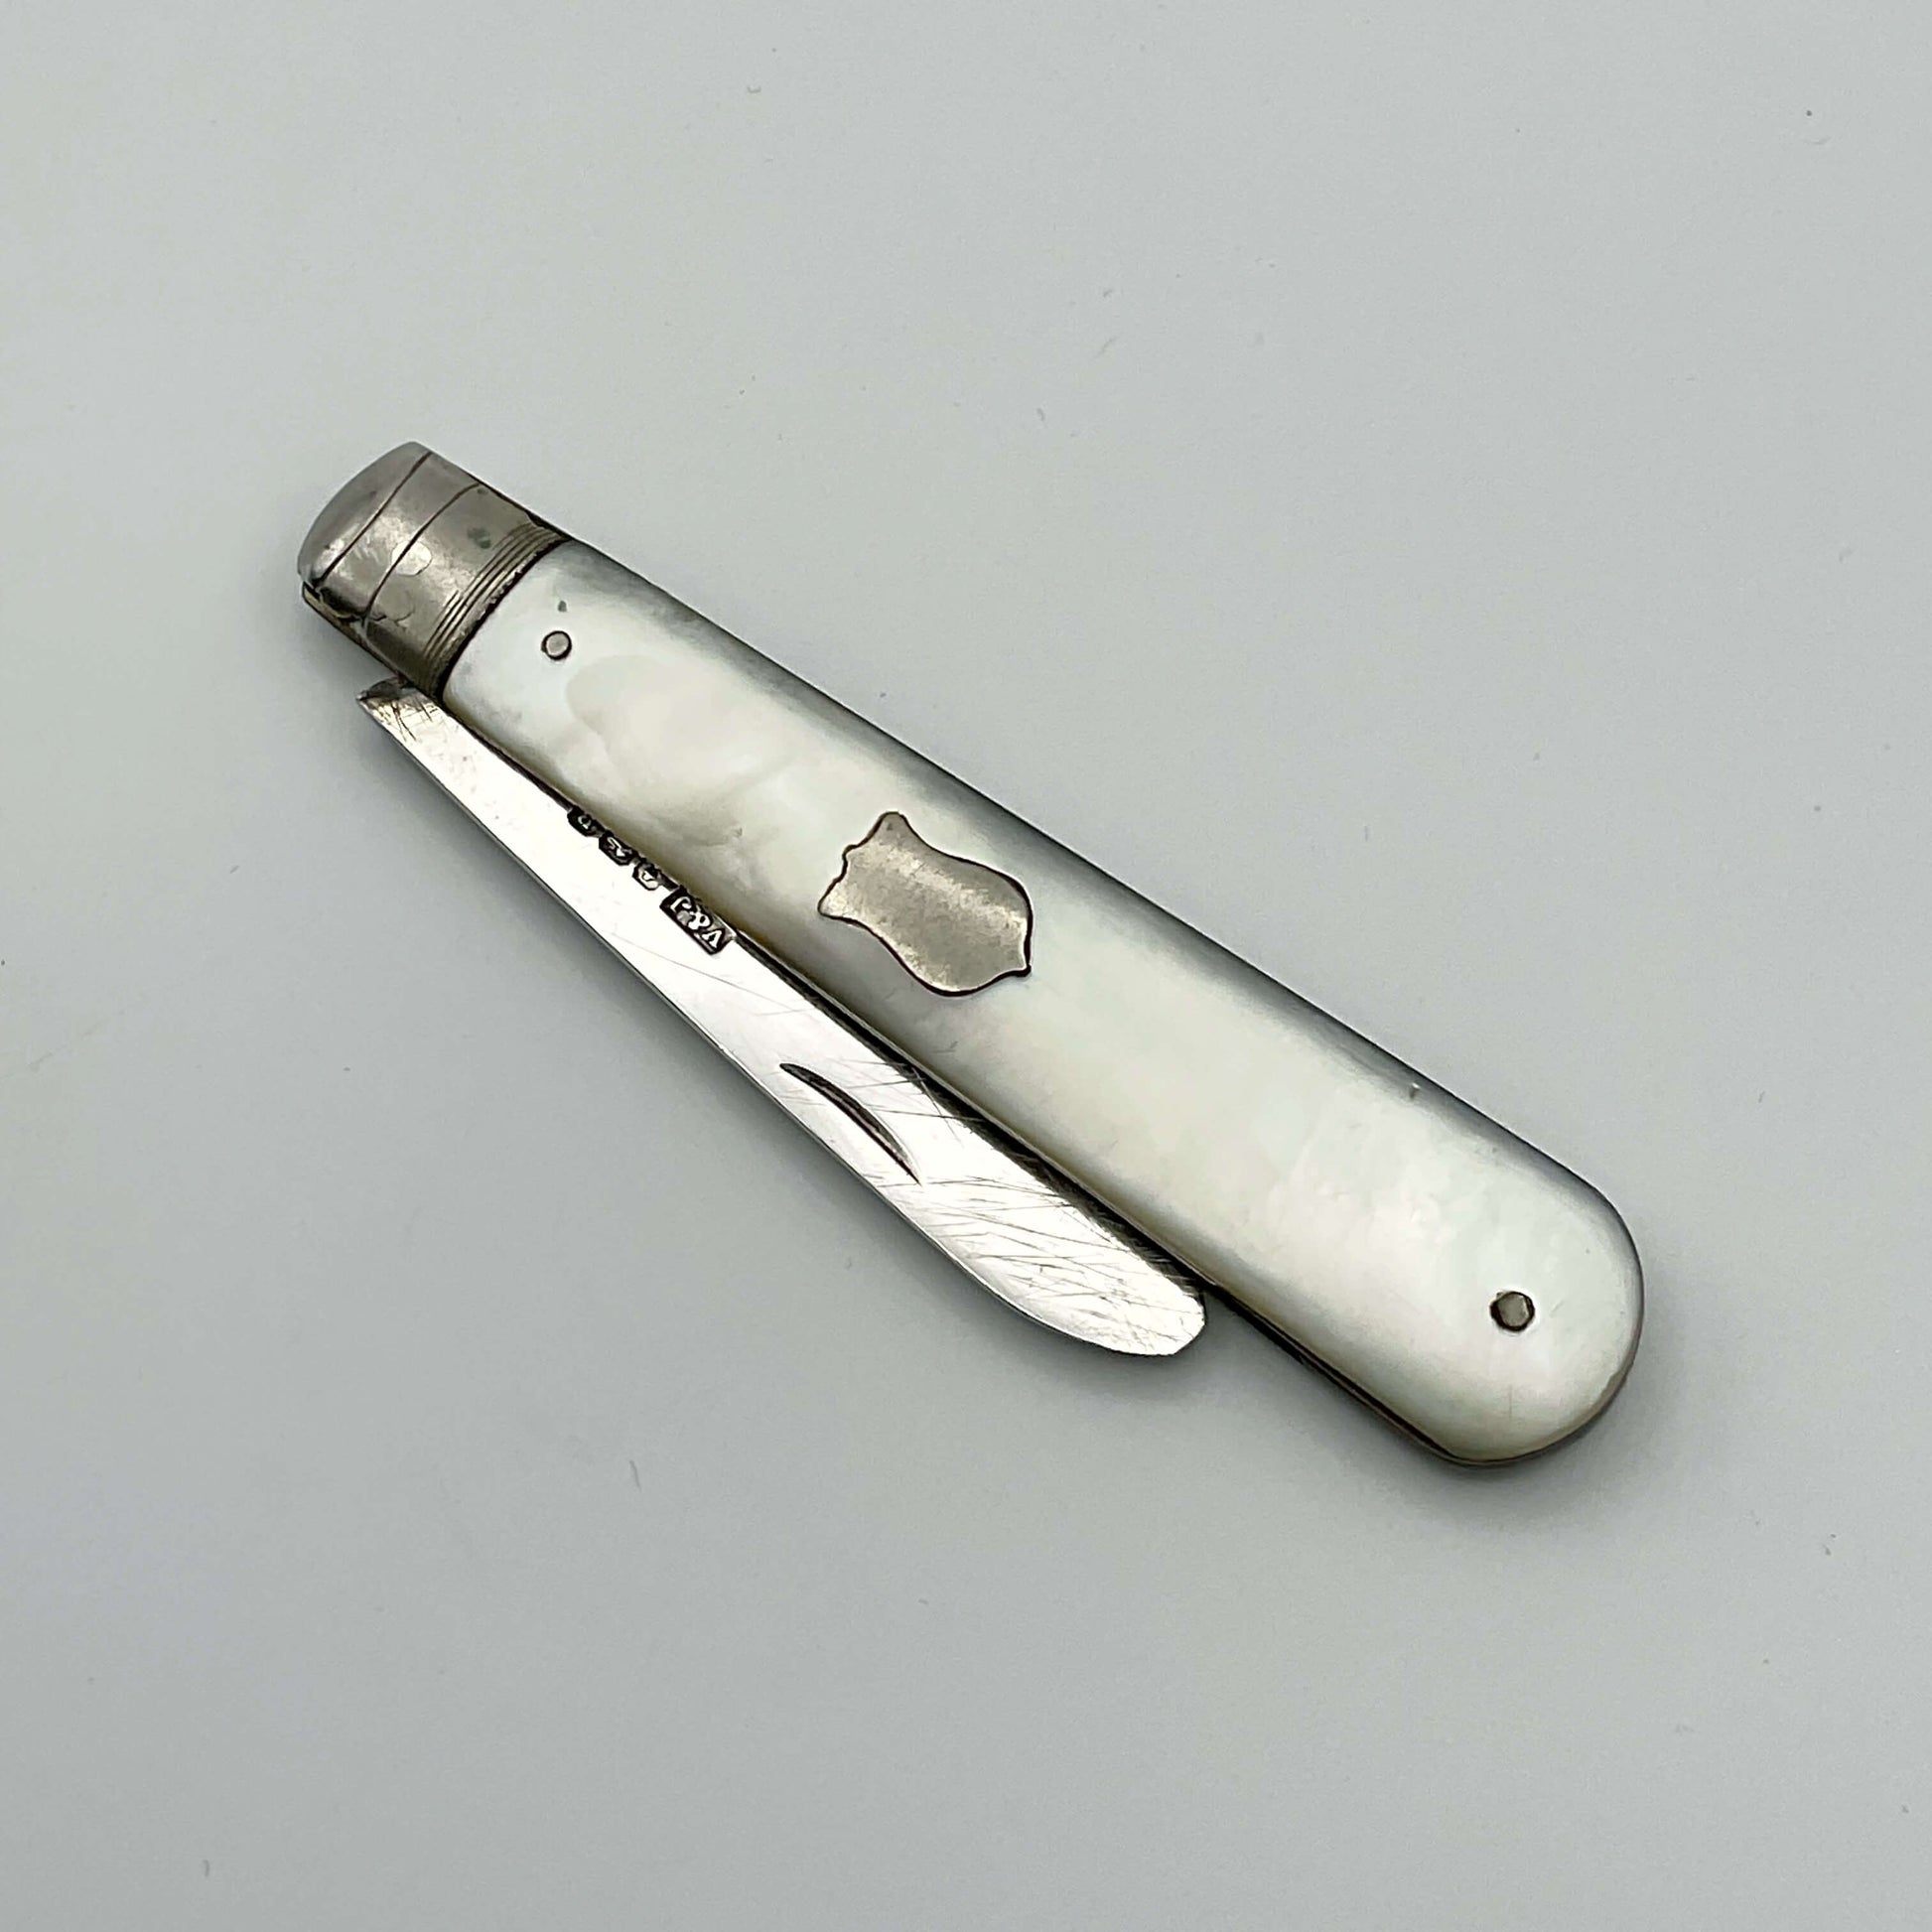 This is s folding fruit knife with a silver blade and a mother of pearl handle. It has a blank shield on one side of the handle with the blade folded in.